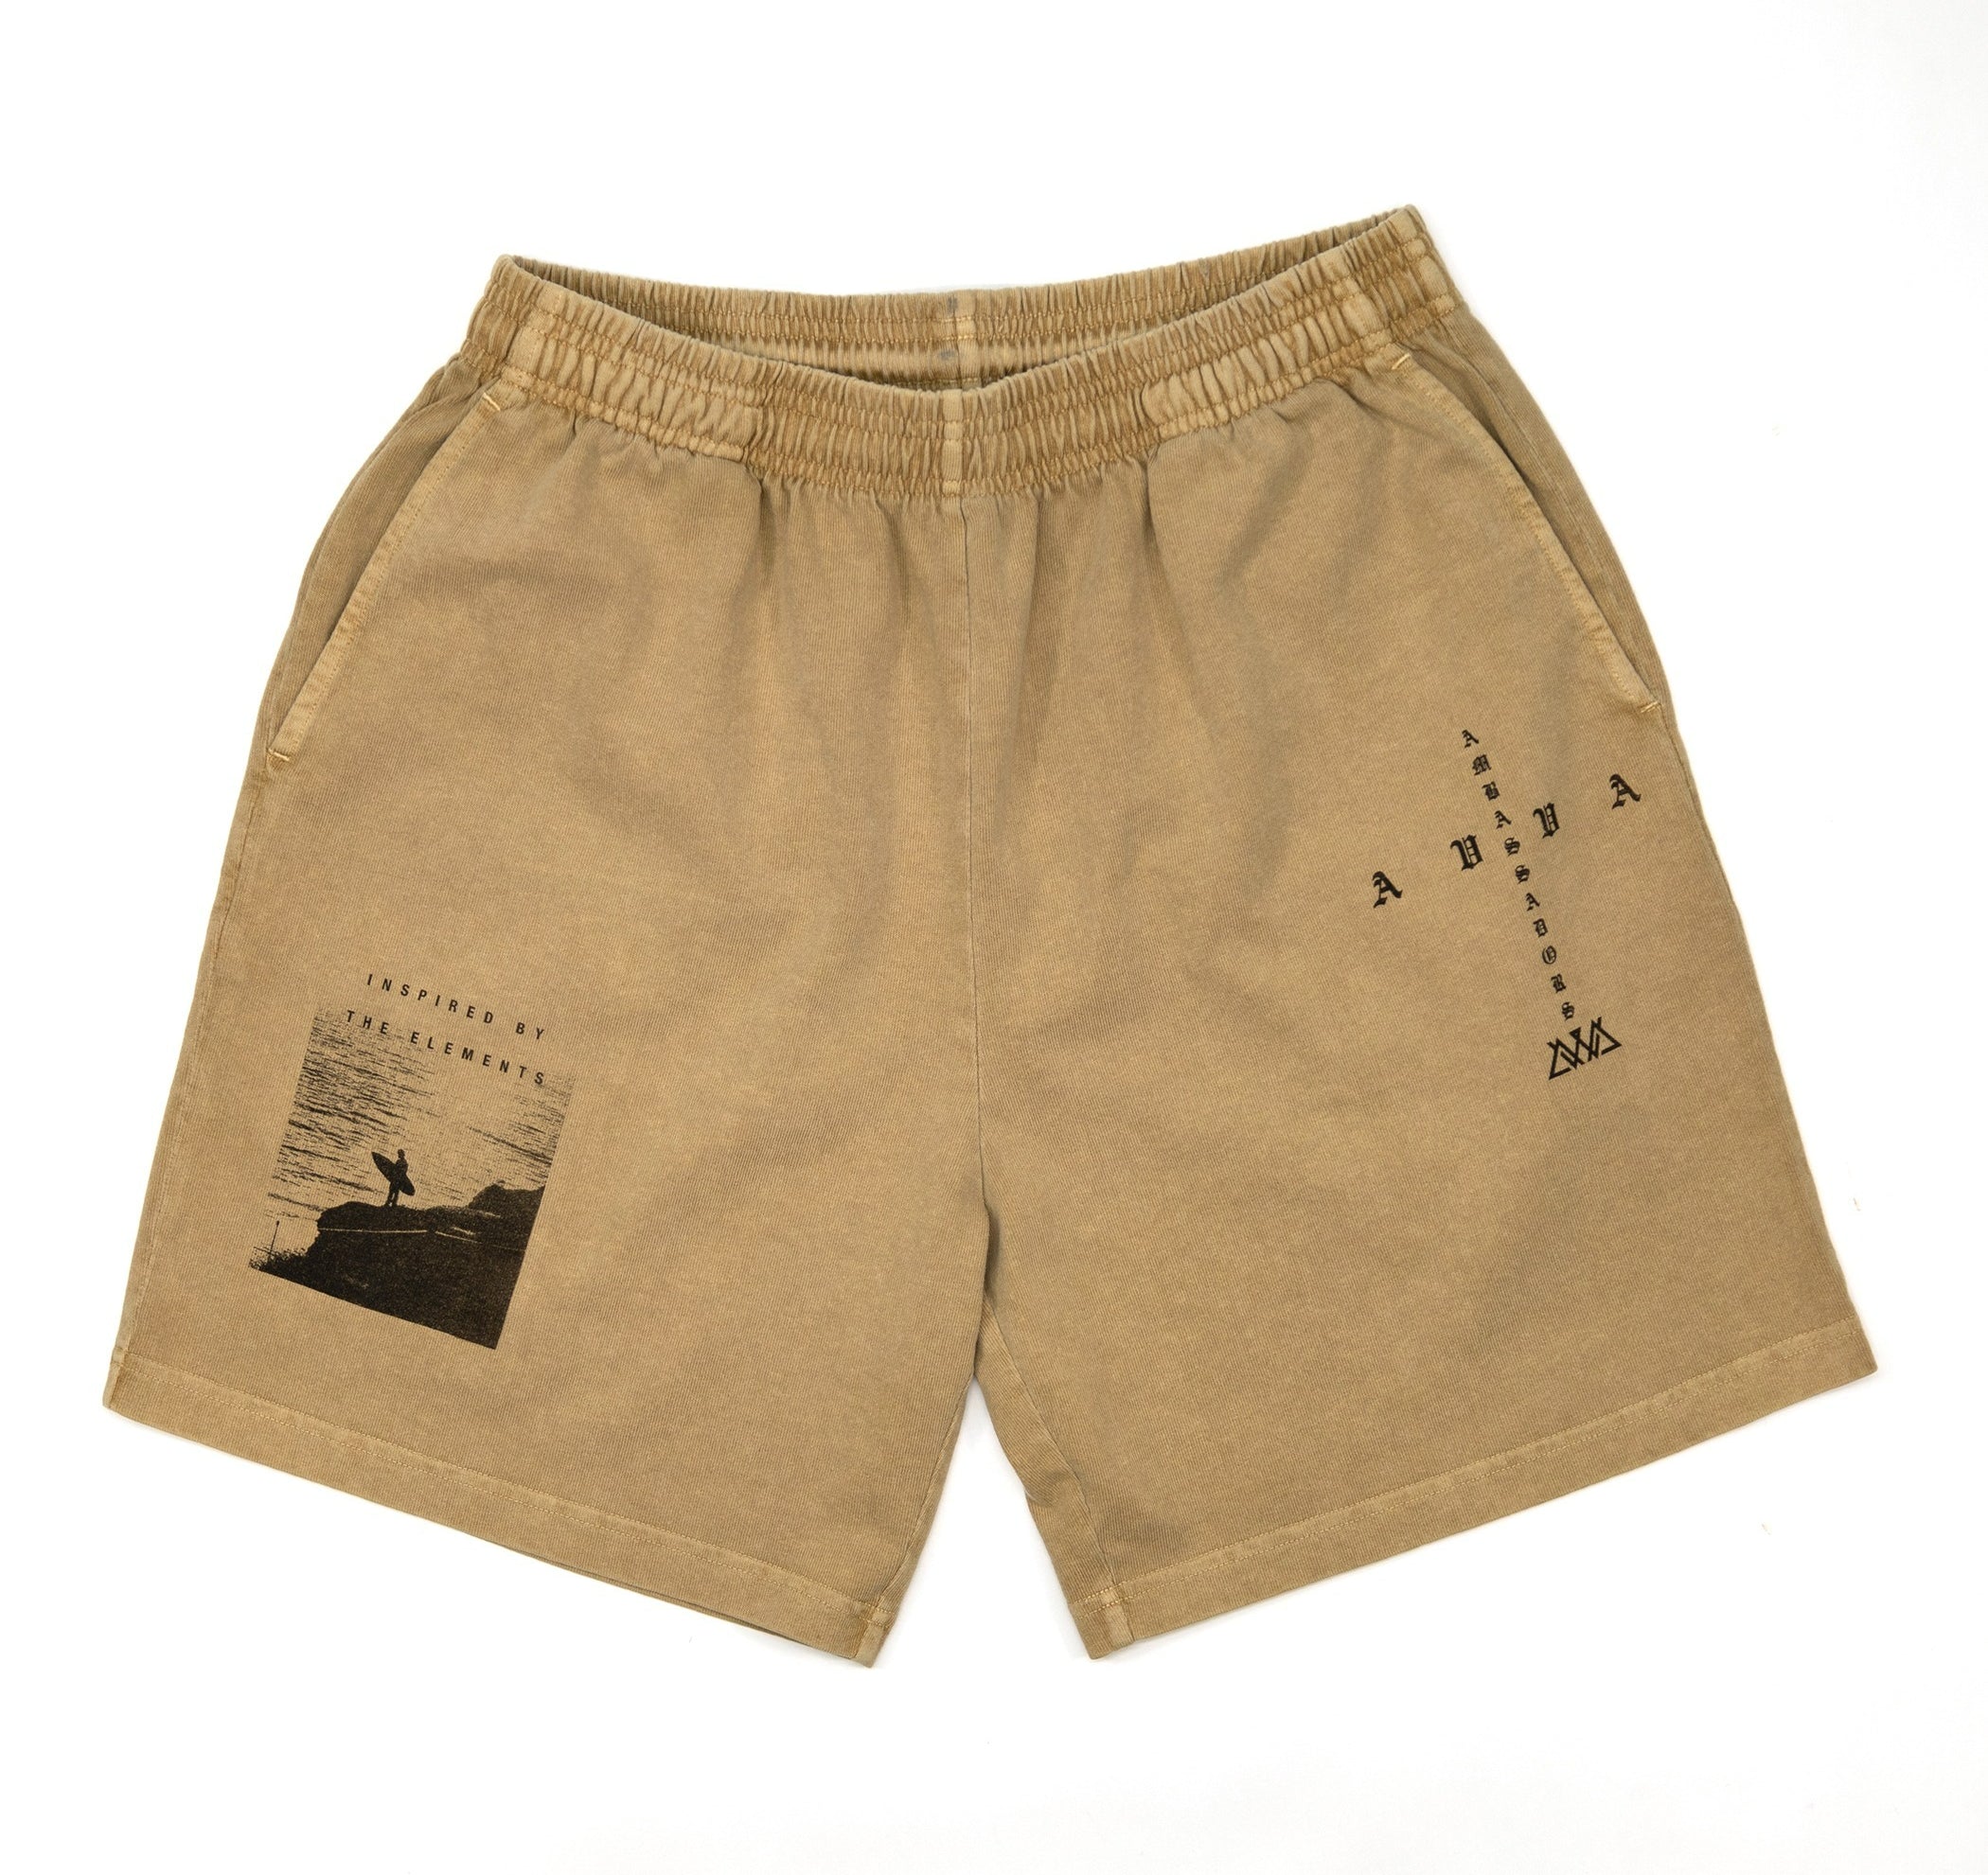 FRONT VIEW OF KHAKI PIGMENT DYED HILO SHORT. SHOWING CROSS SHAPED LOGO ON LEFT LEG AND INSPIRED BY THE ELEMENTS LOGO AND PICTURE OF SURFER HOLDING BOARD LOOKING AT WATER ON RIGHT SIDE LEG.